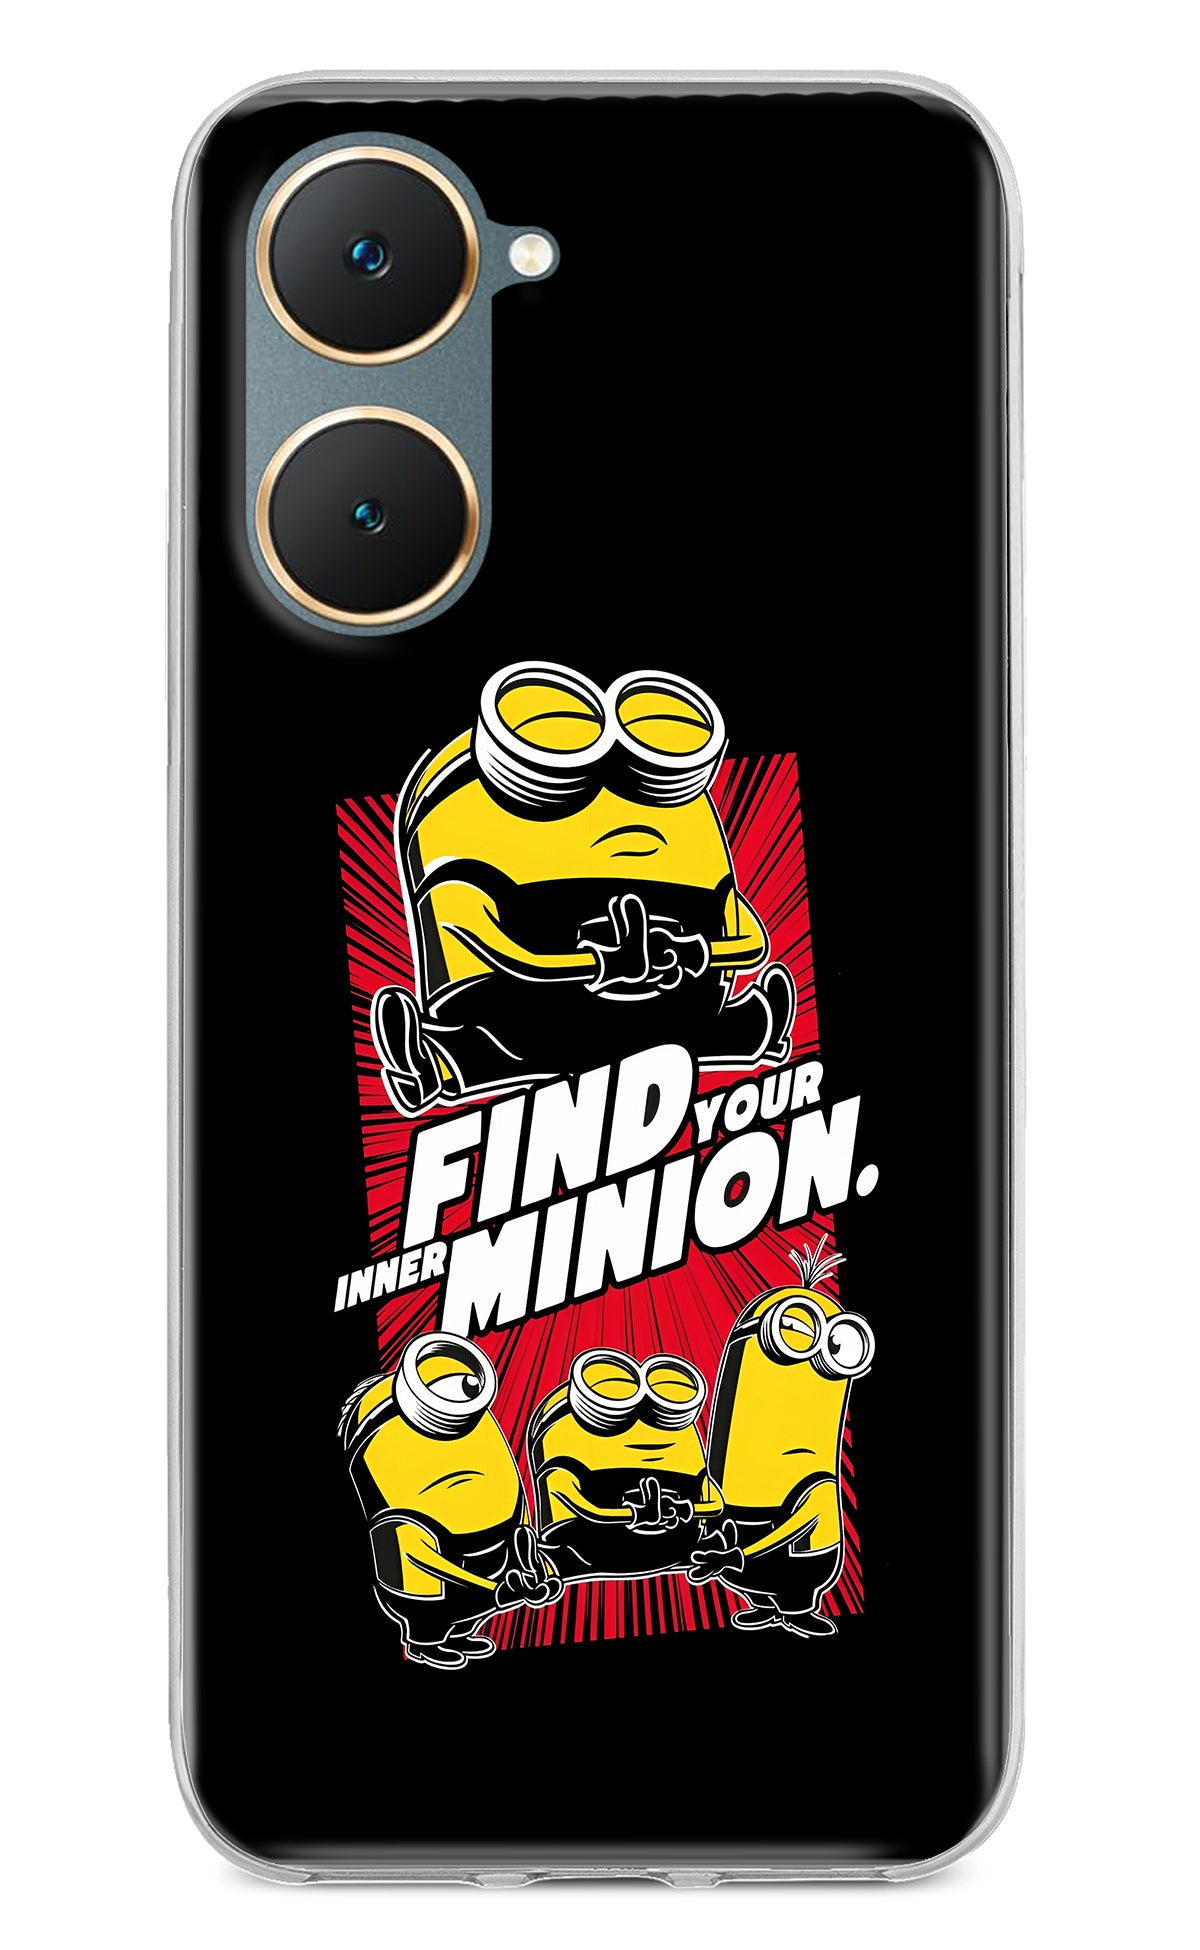 Find your inner Minion Vivo Y18/Y18e Back Cover